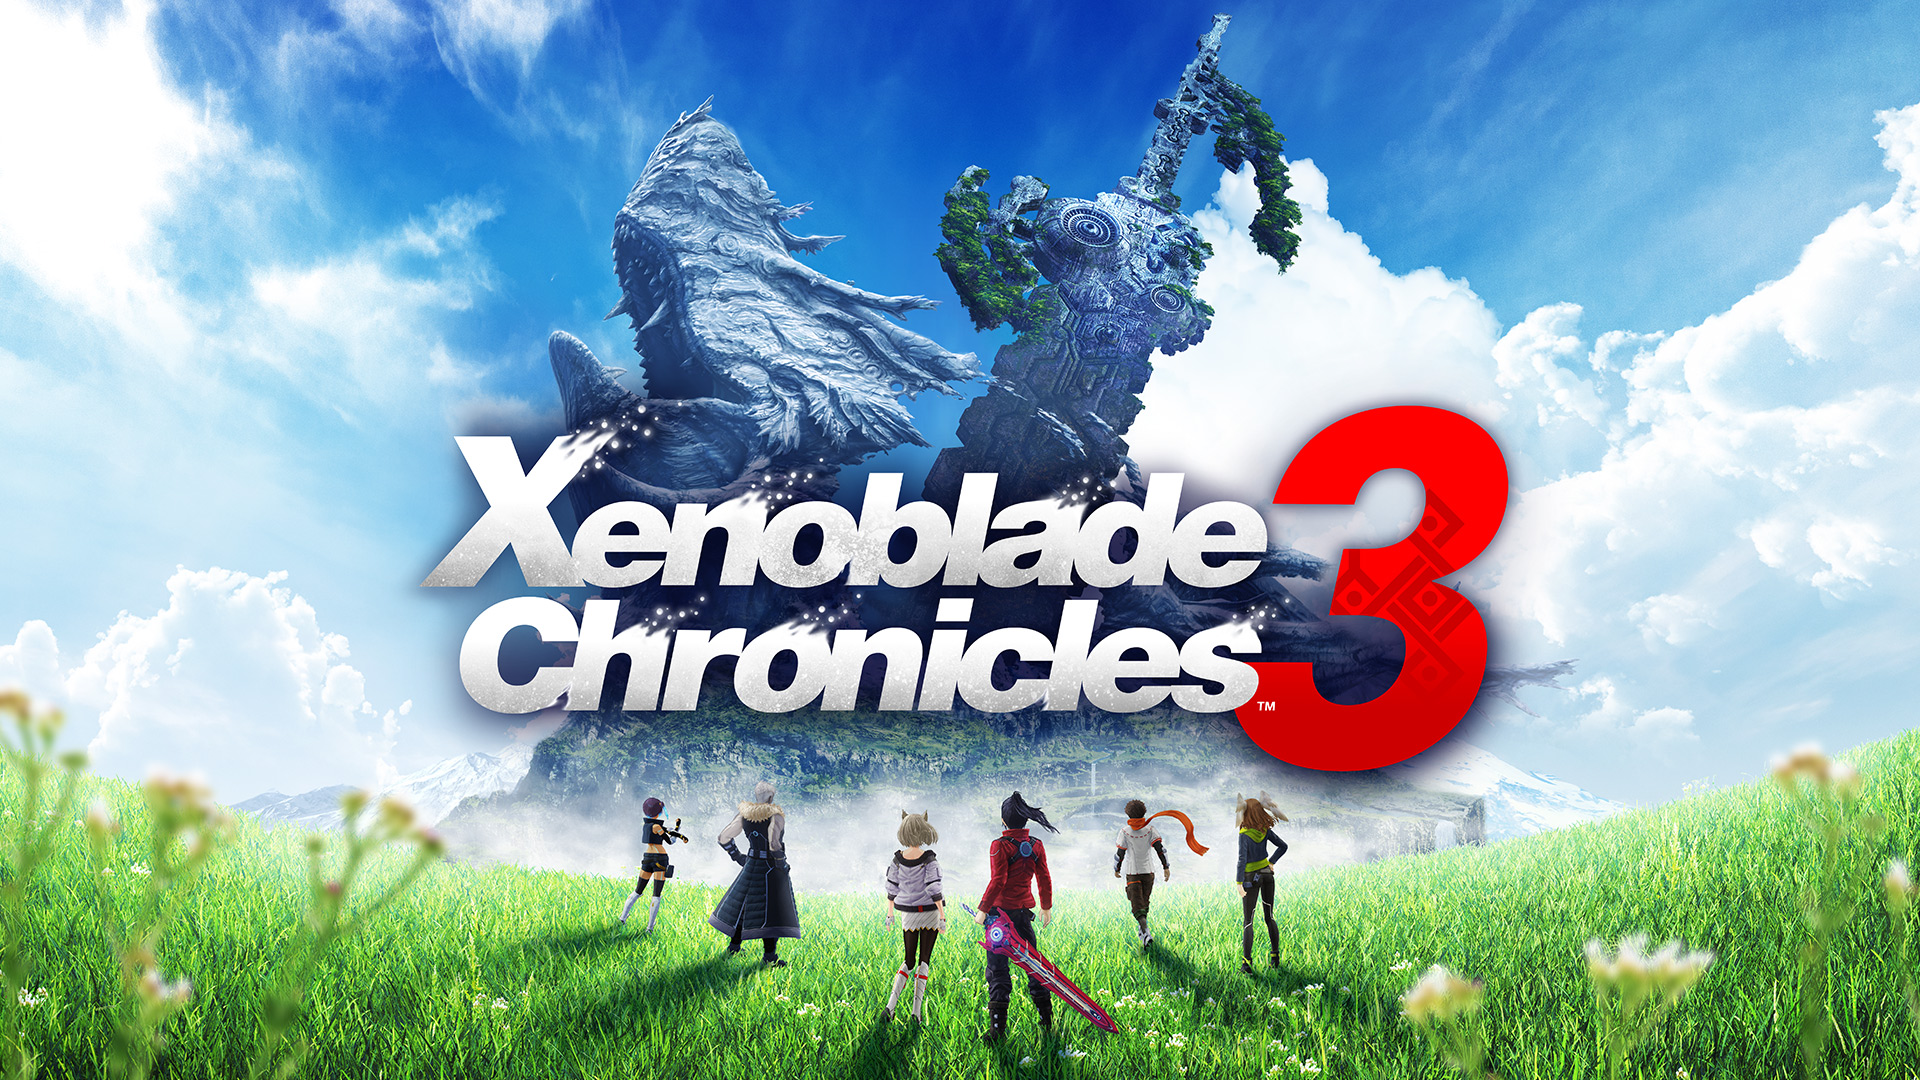 Xenoblade Chronicles 3 - The Great Quiz